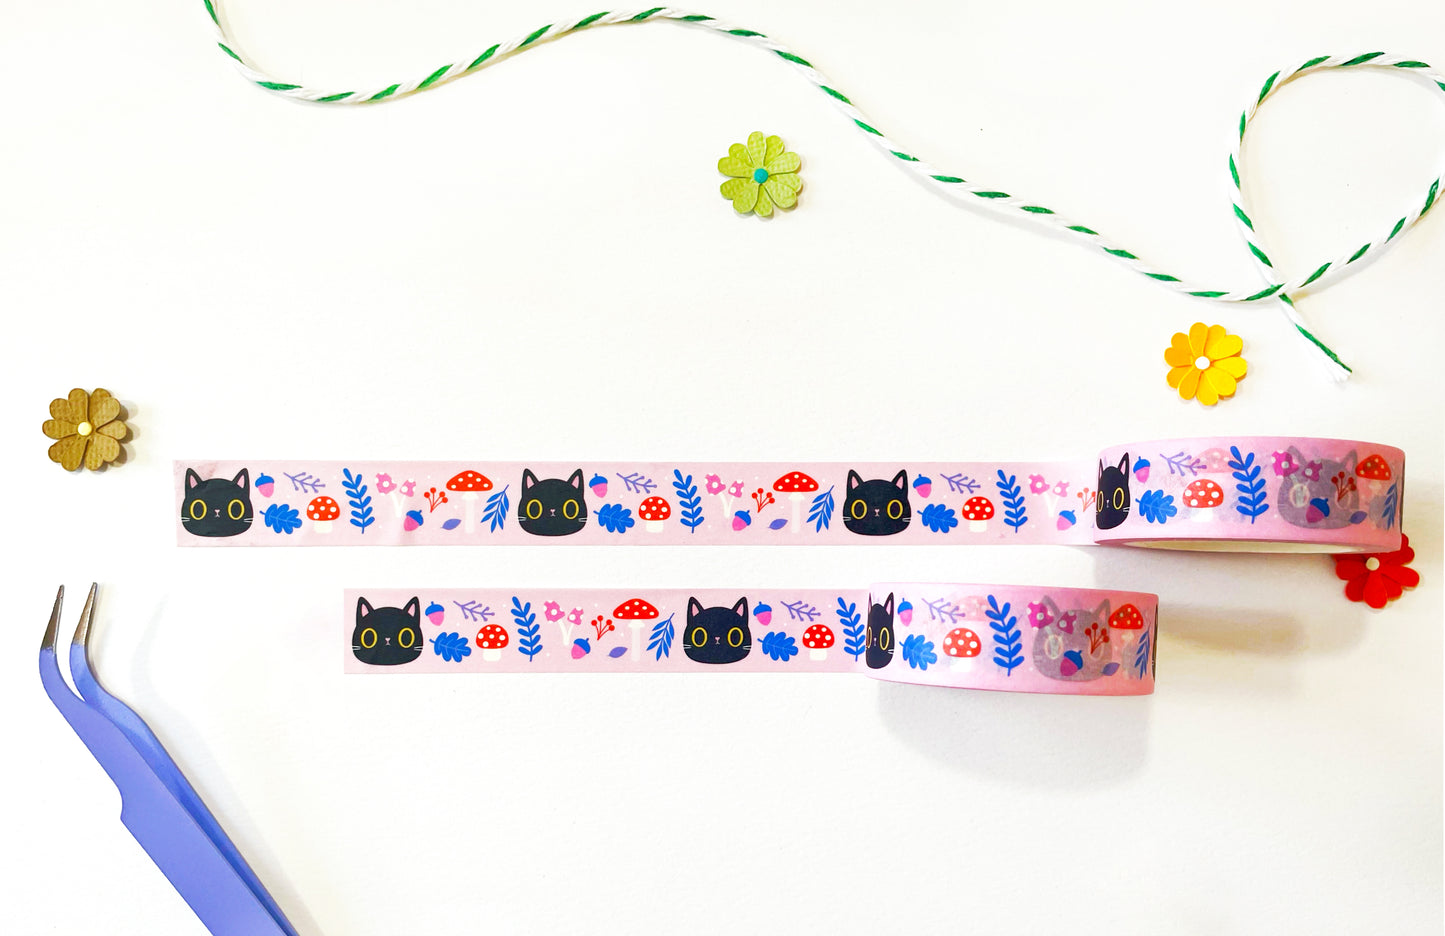 Black Cats Kawaii Washi Tape - Super cute stationery for cat lovers